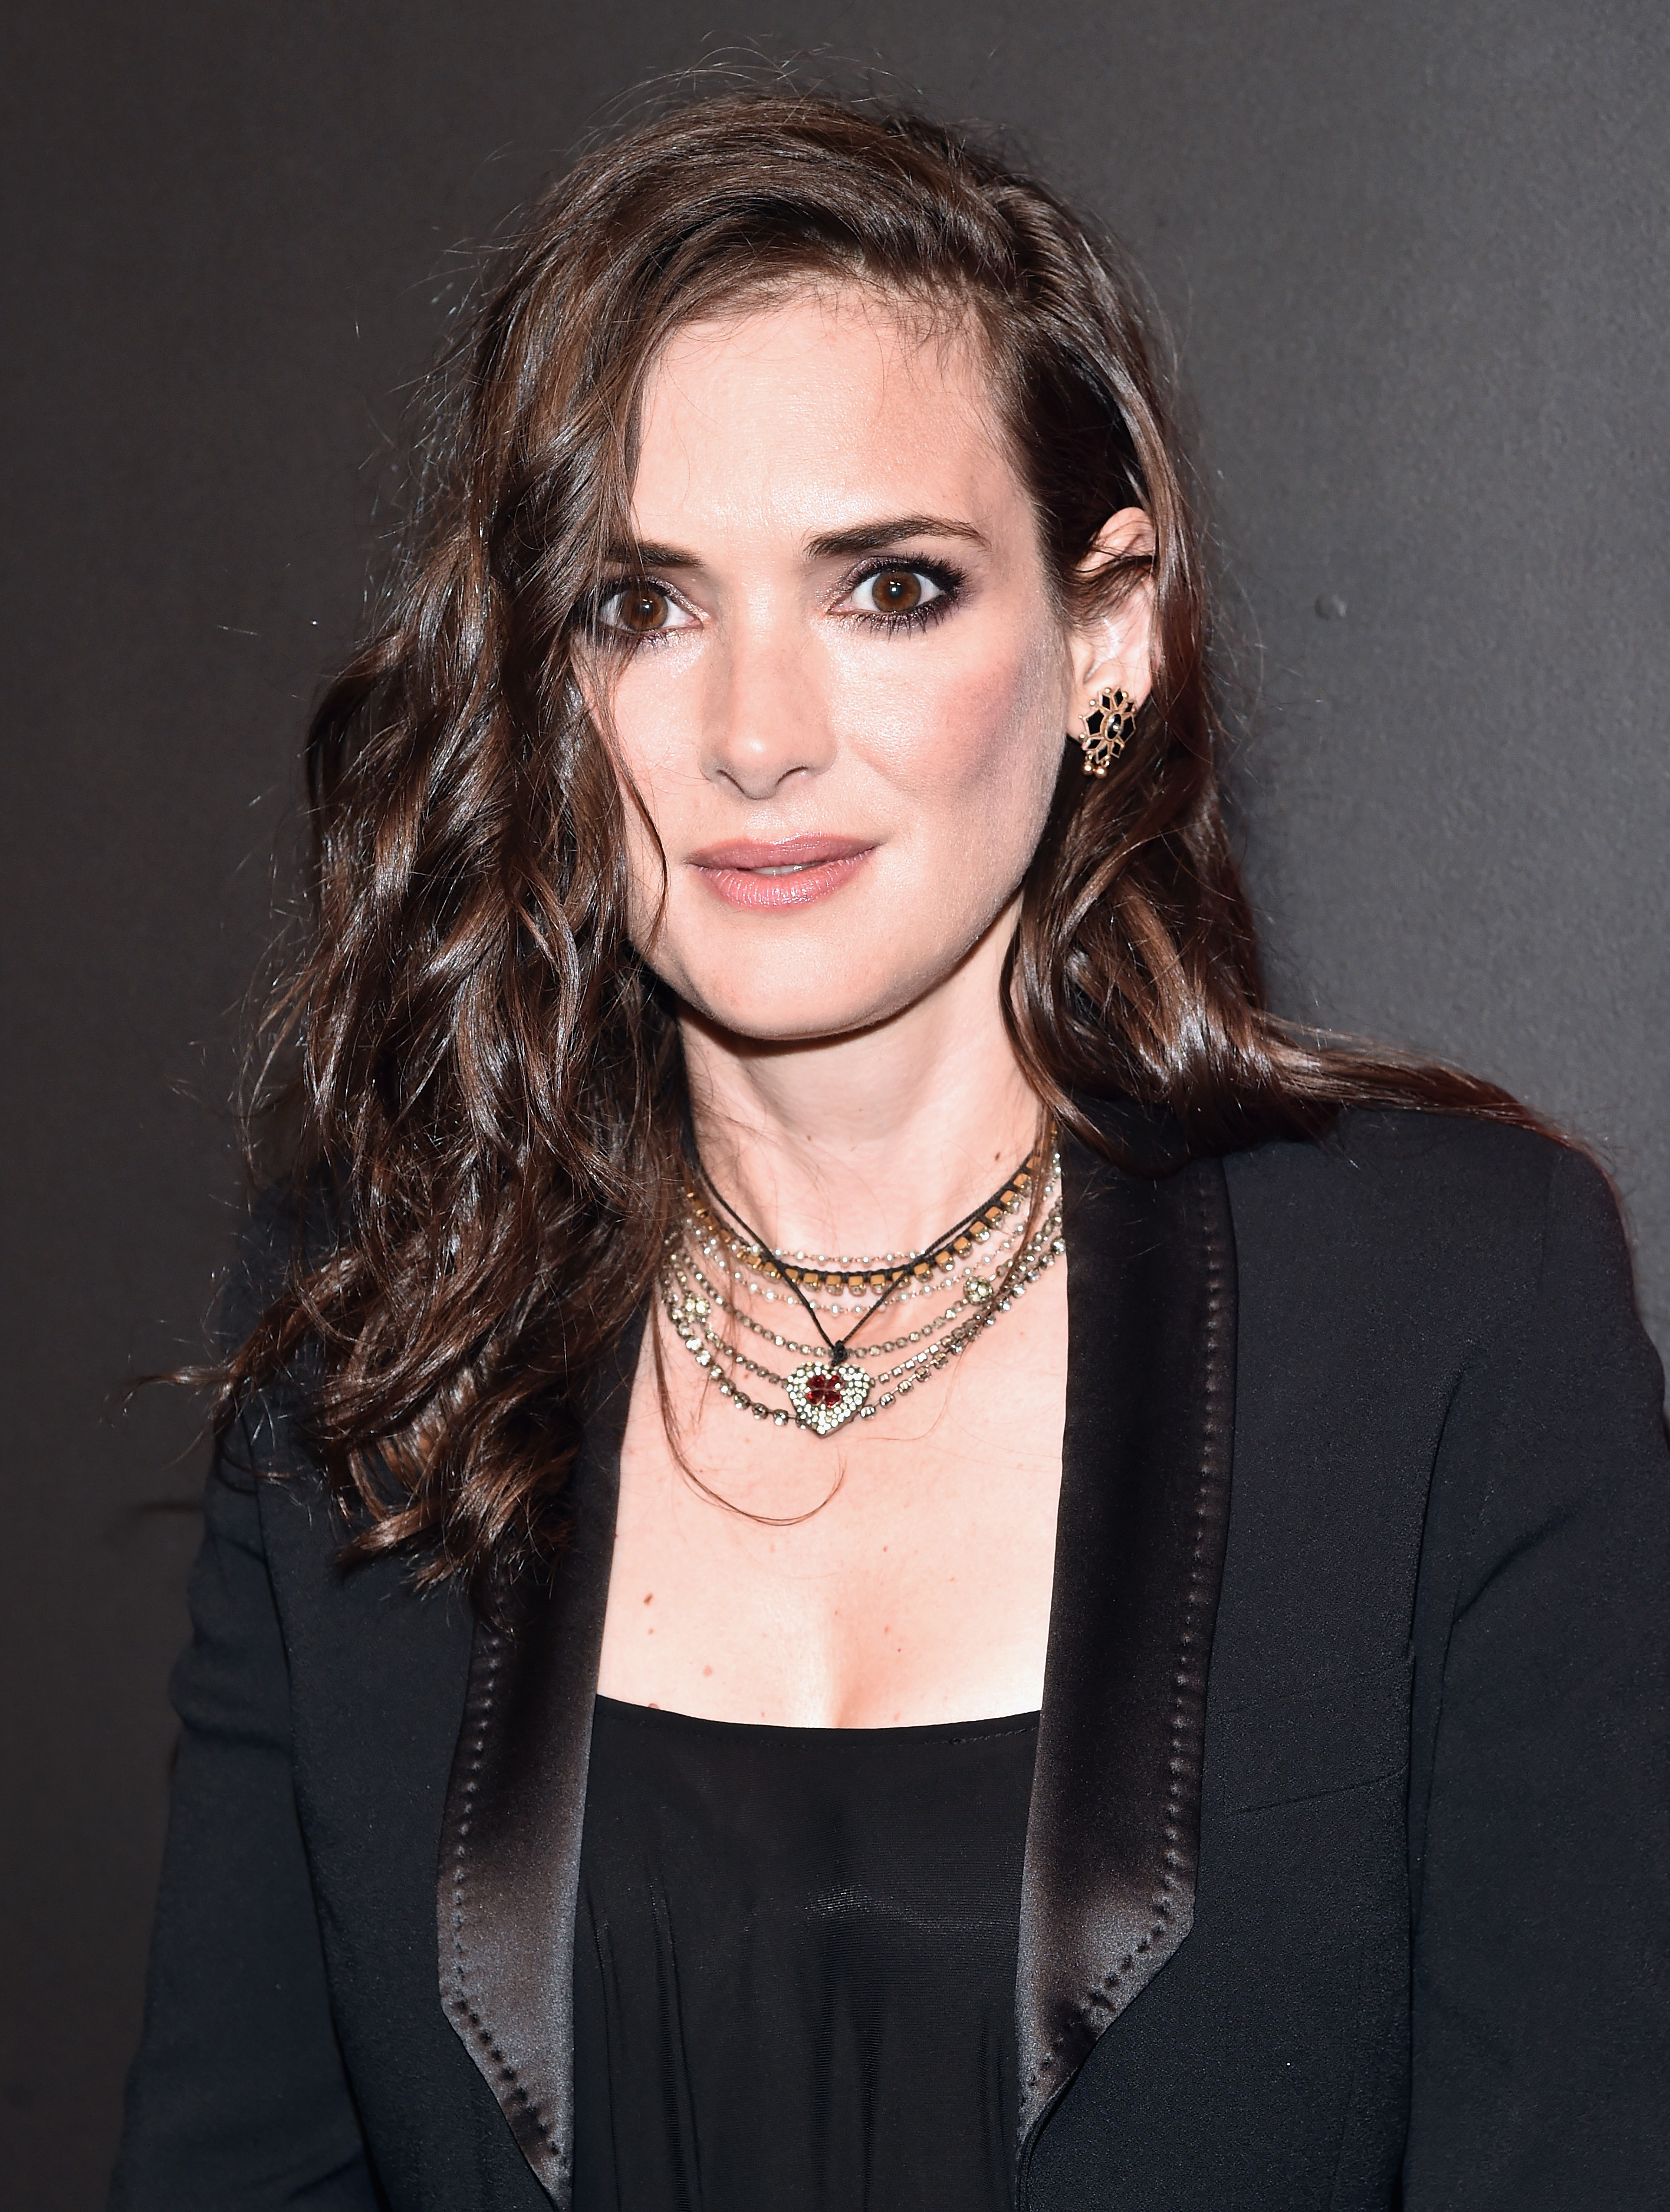 Dave allegedly ended things to dated Winona Ryder